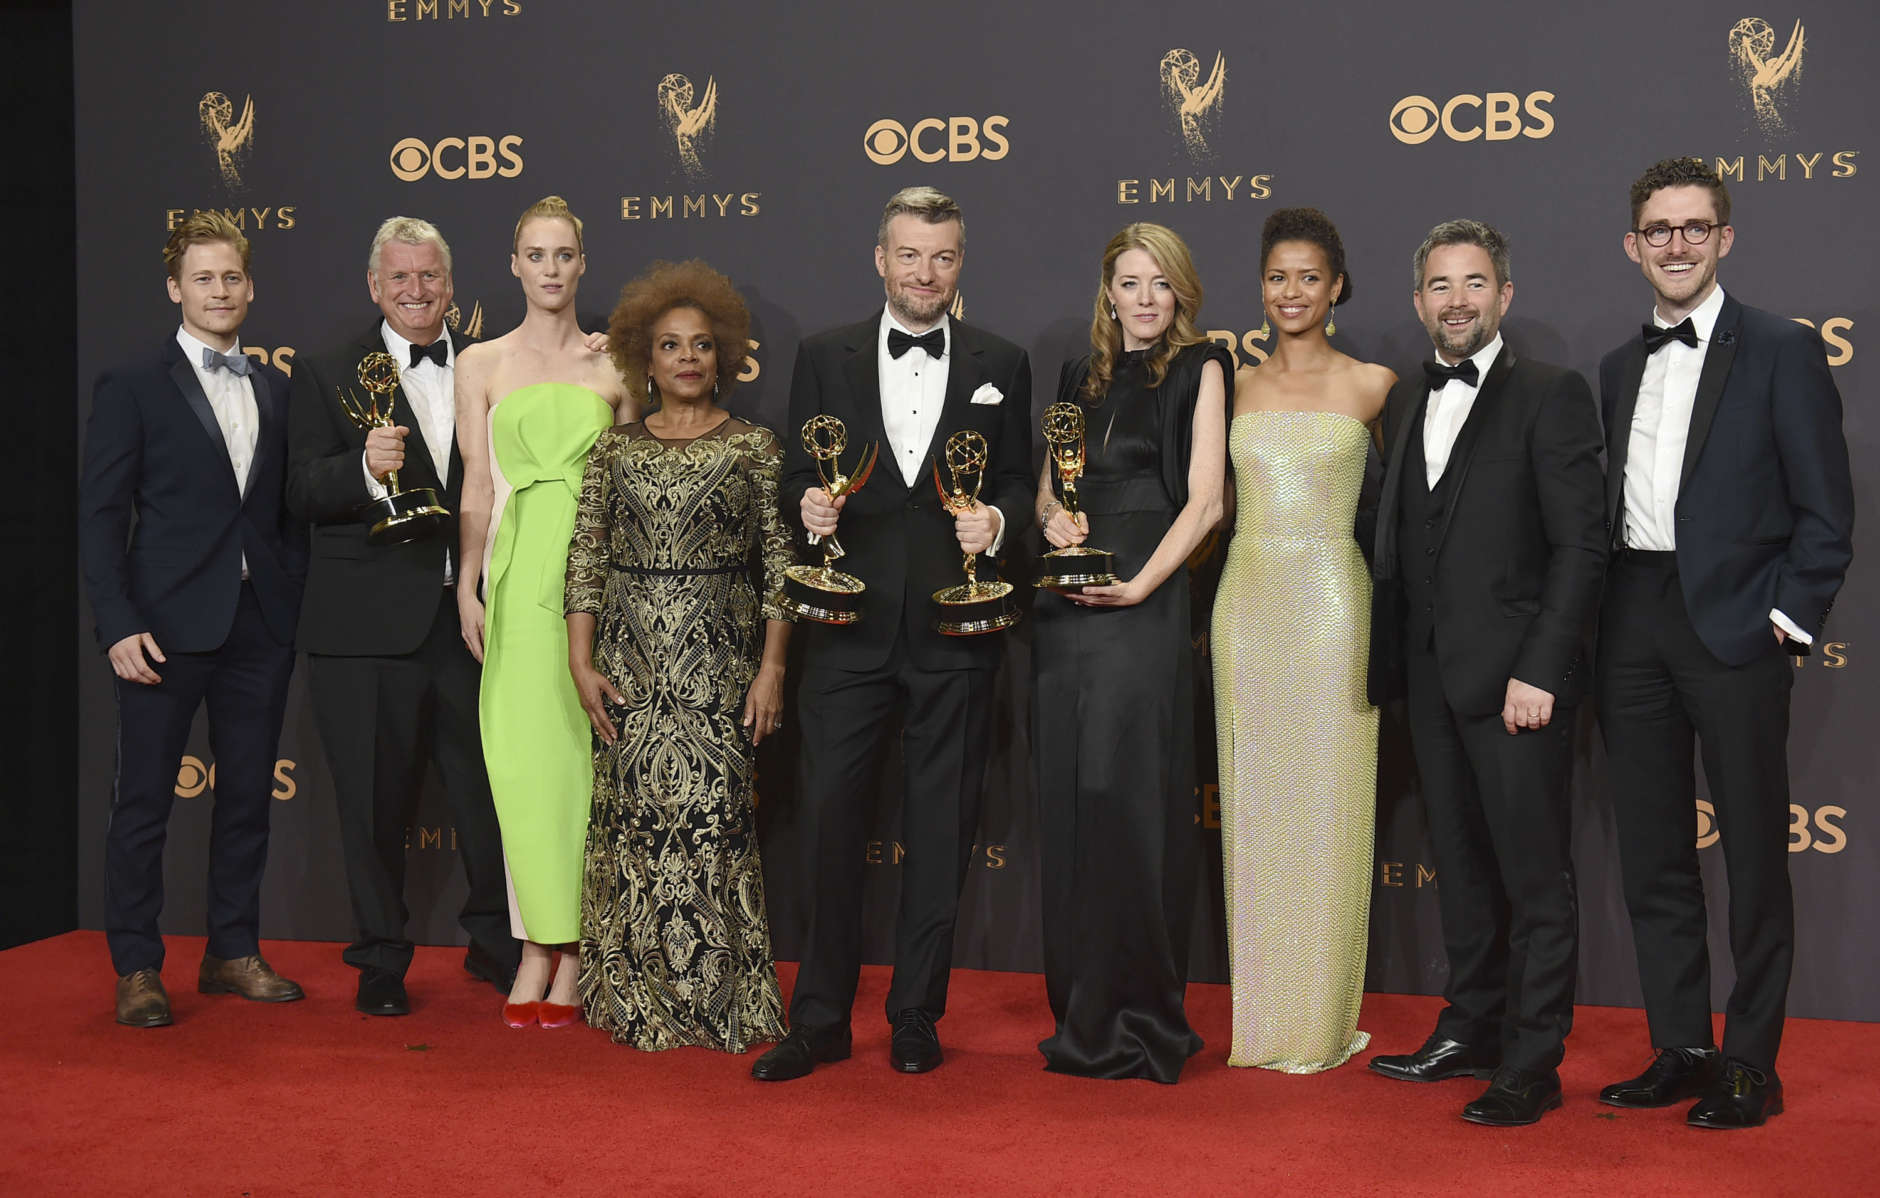 The cast and crew of "Black Mirror: San Junipero" pose in the press room with their awards for for outstanding television movie at the 69th Primetime Emmy Awards on Sunday, Sept. 17, 2017, at the Microsoft Theater in Los Angeles. (Photo by Jordan Strauss/Invision/AP)